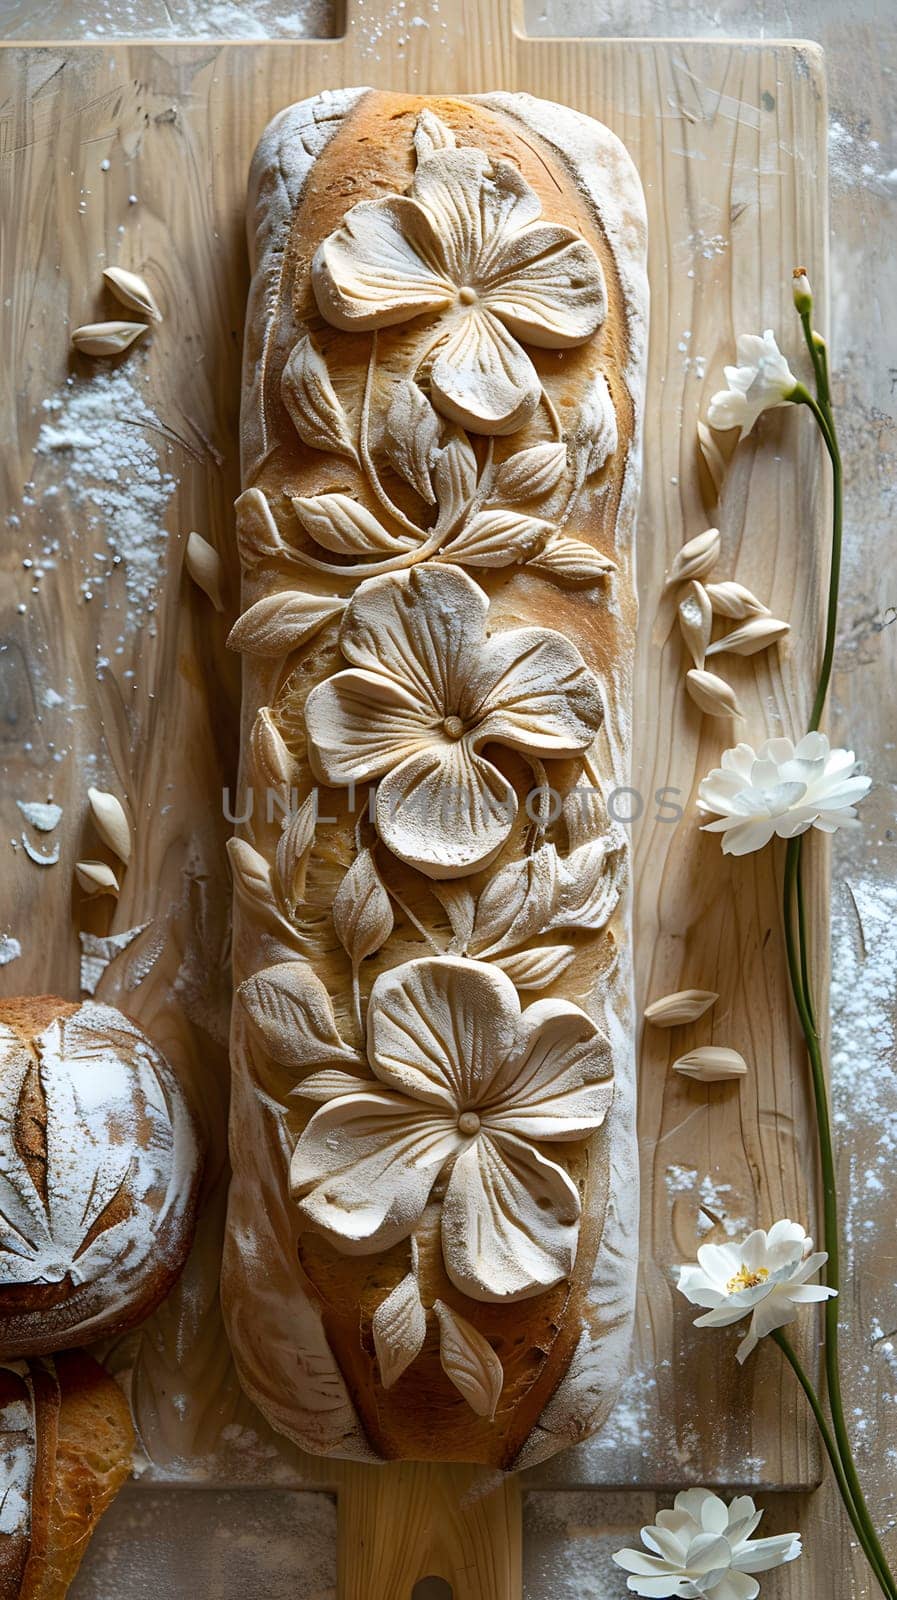 Carved flower loaf on wood board, a beautiful natural pattern by Nadtochiy